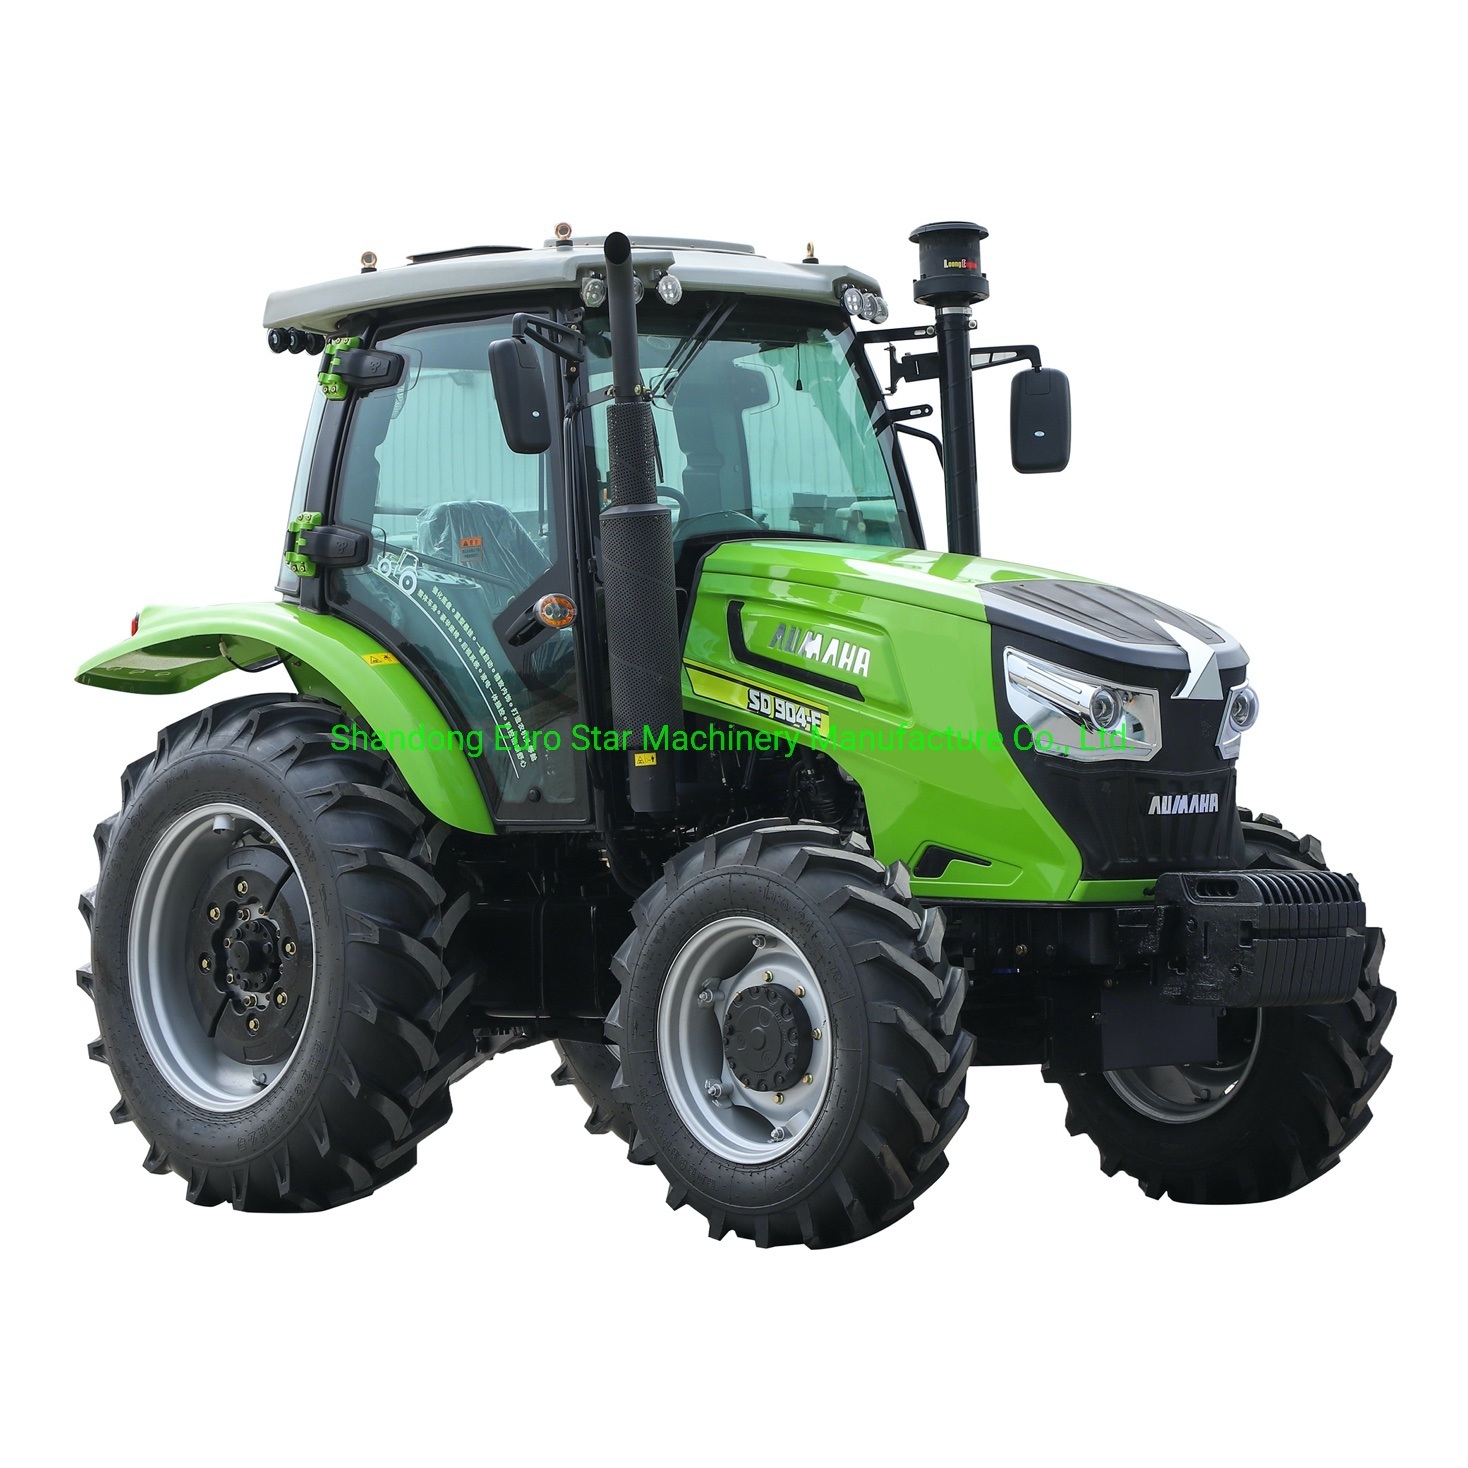 D-4WD-90HP-Wheel-Tractor-Mini-Orchard-Small-Four-Farm-Crawler-Paddy-Lawn-Big-Garden-Walking-Diesel-China-Tractor-for-Agricultural-Machinery-Machine-Es9048d-CE (5).jpg